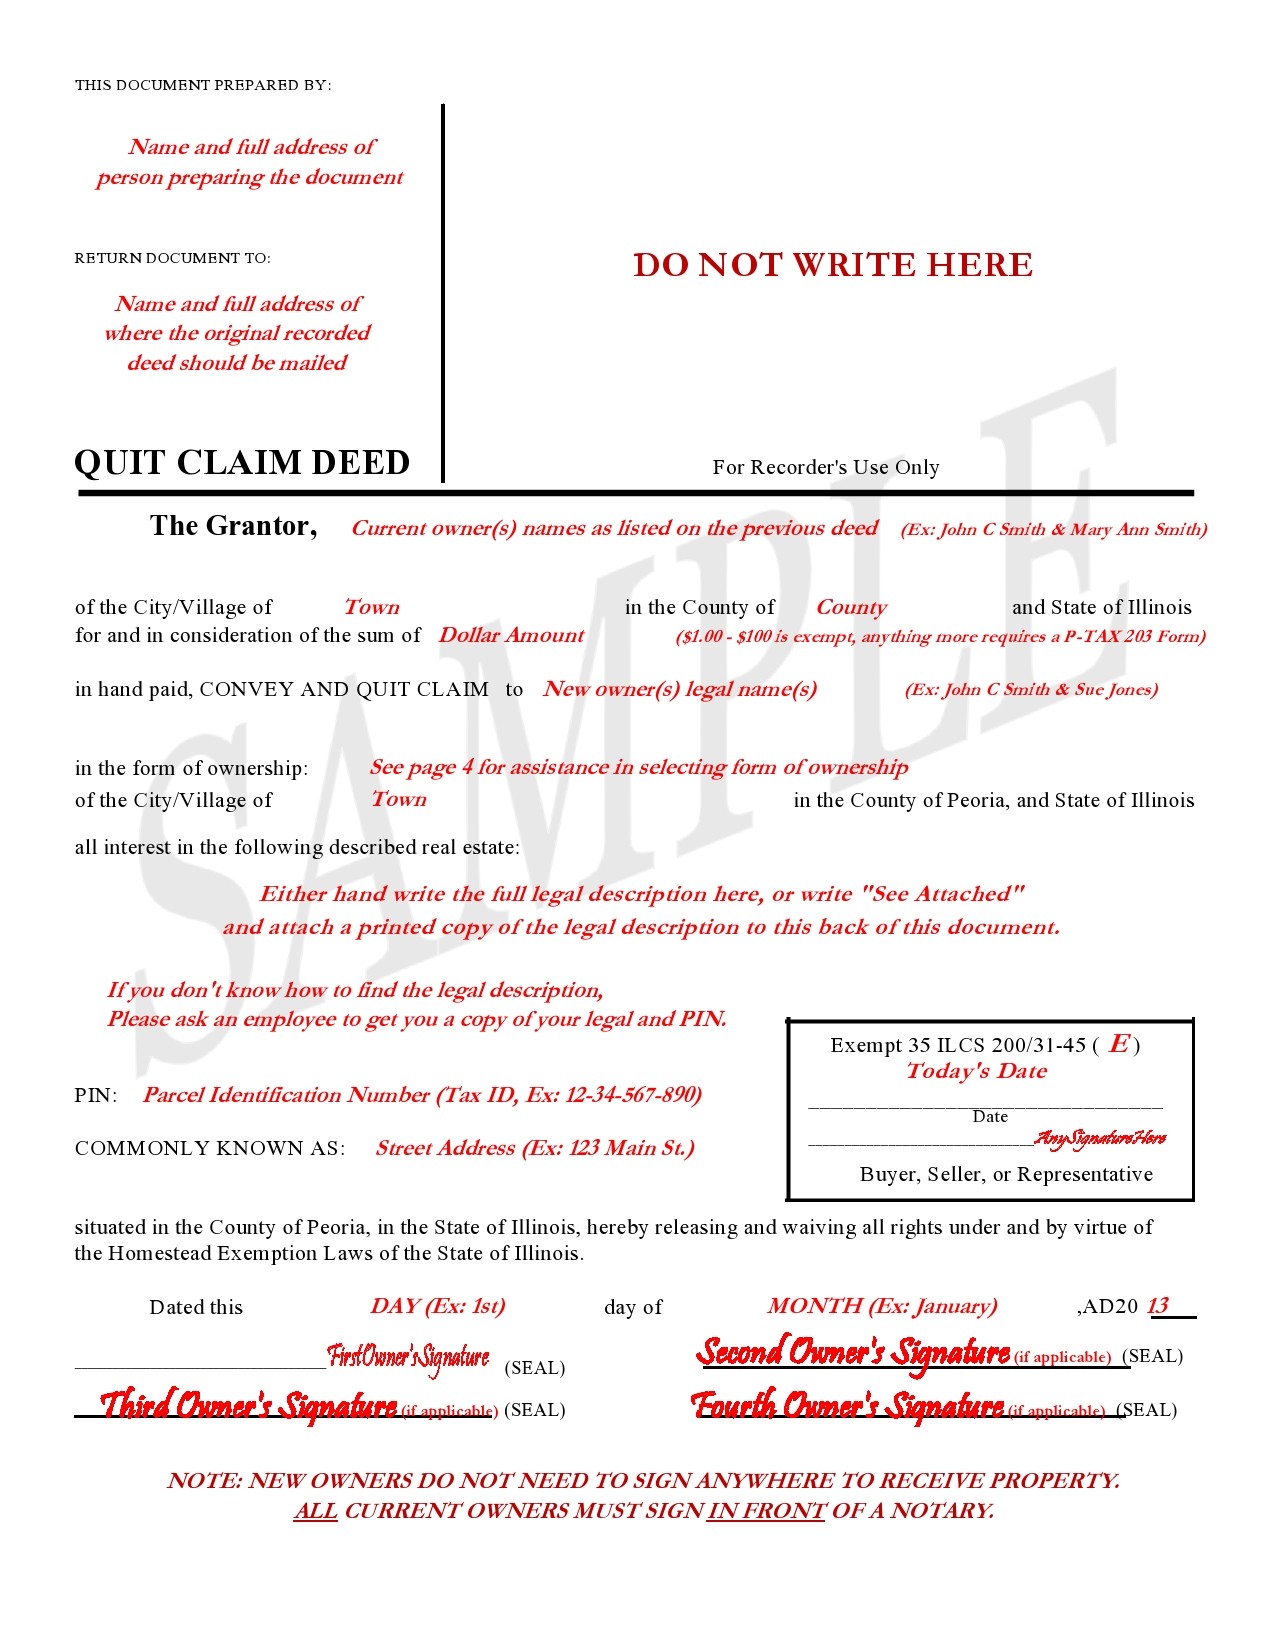 Free quit claim deed form 02